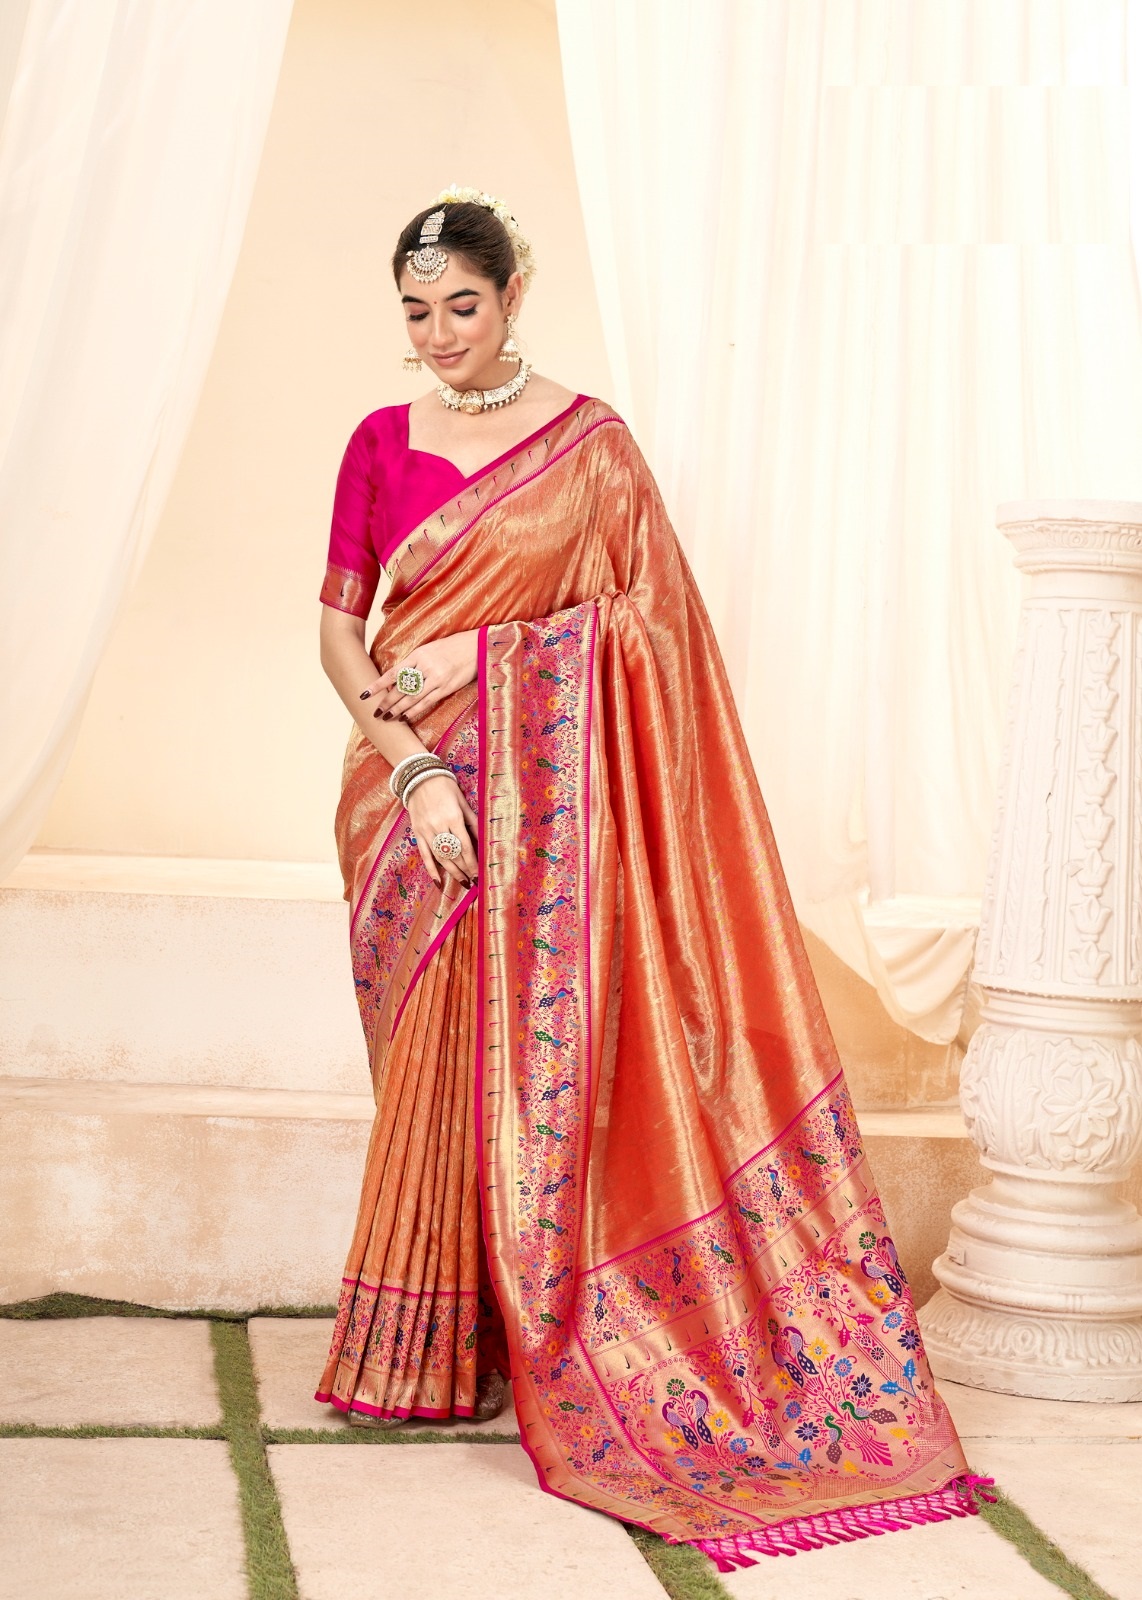 Beautiful Cotton Silk with Hand-loom and Unique Concept for online sale sari